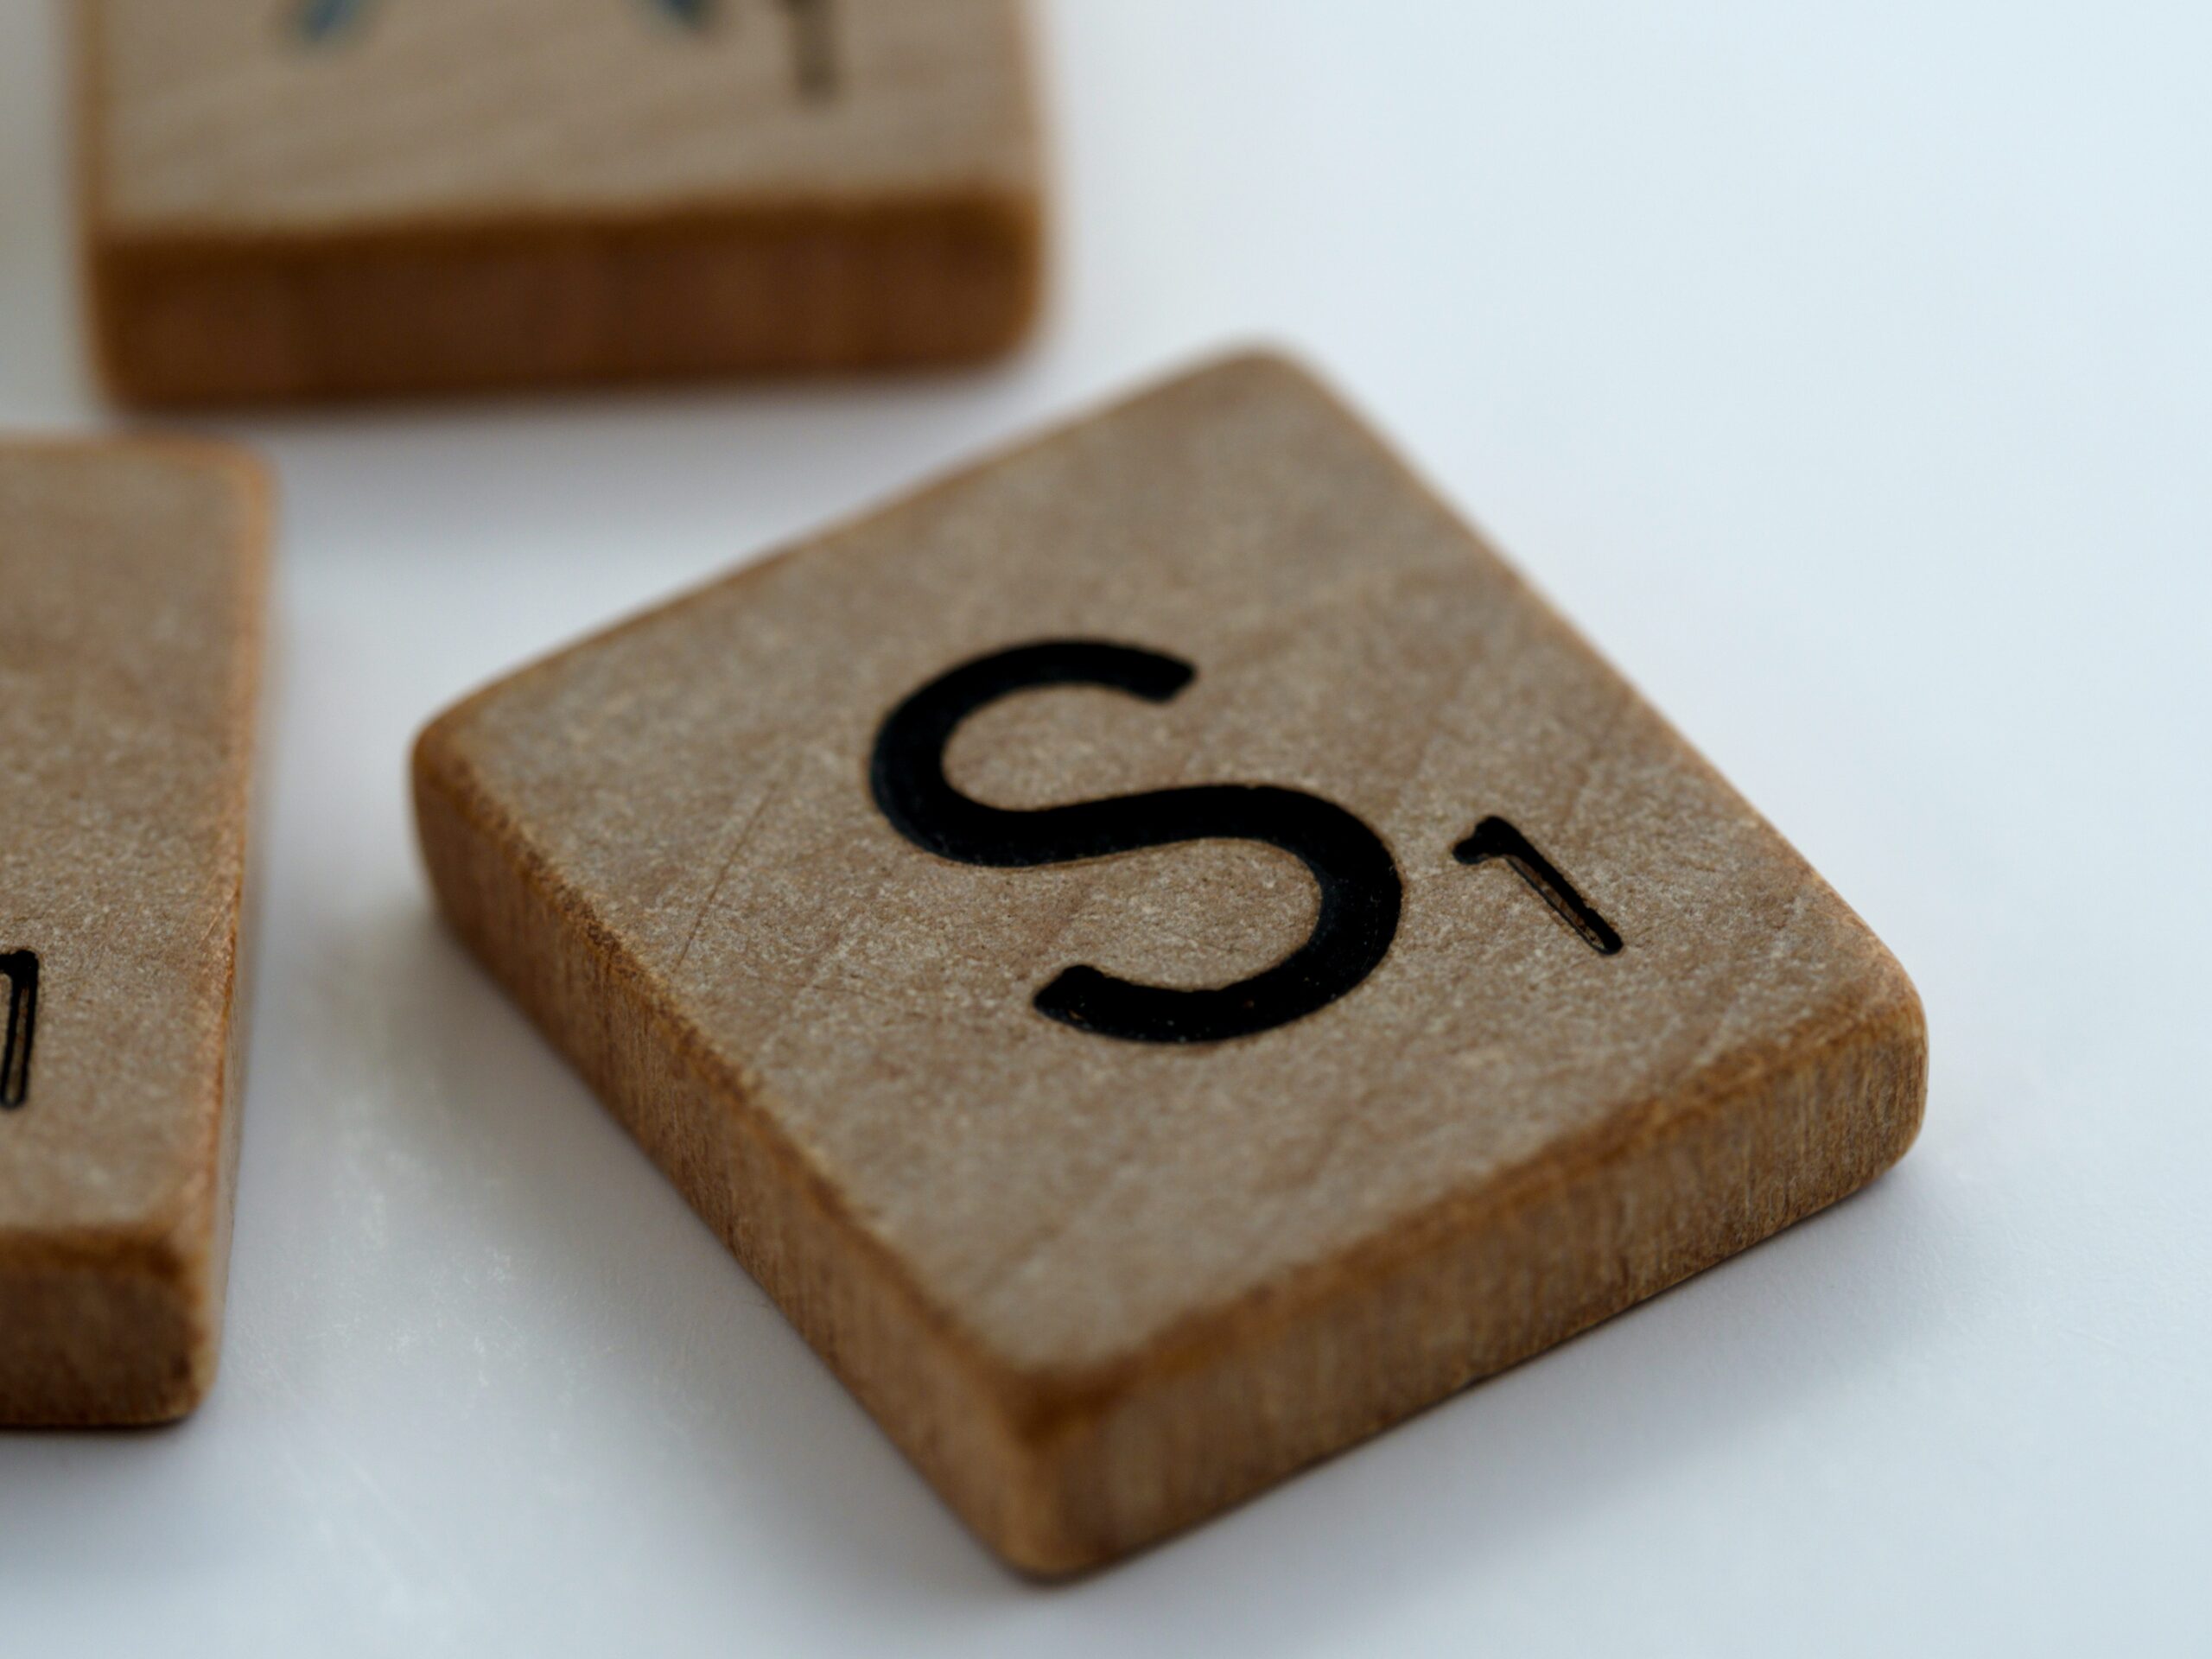 An "S" from a Scrabble board